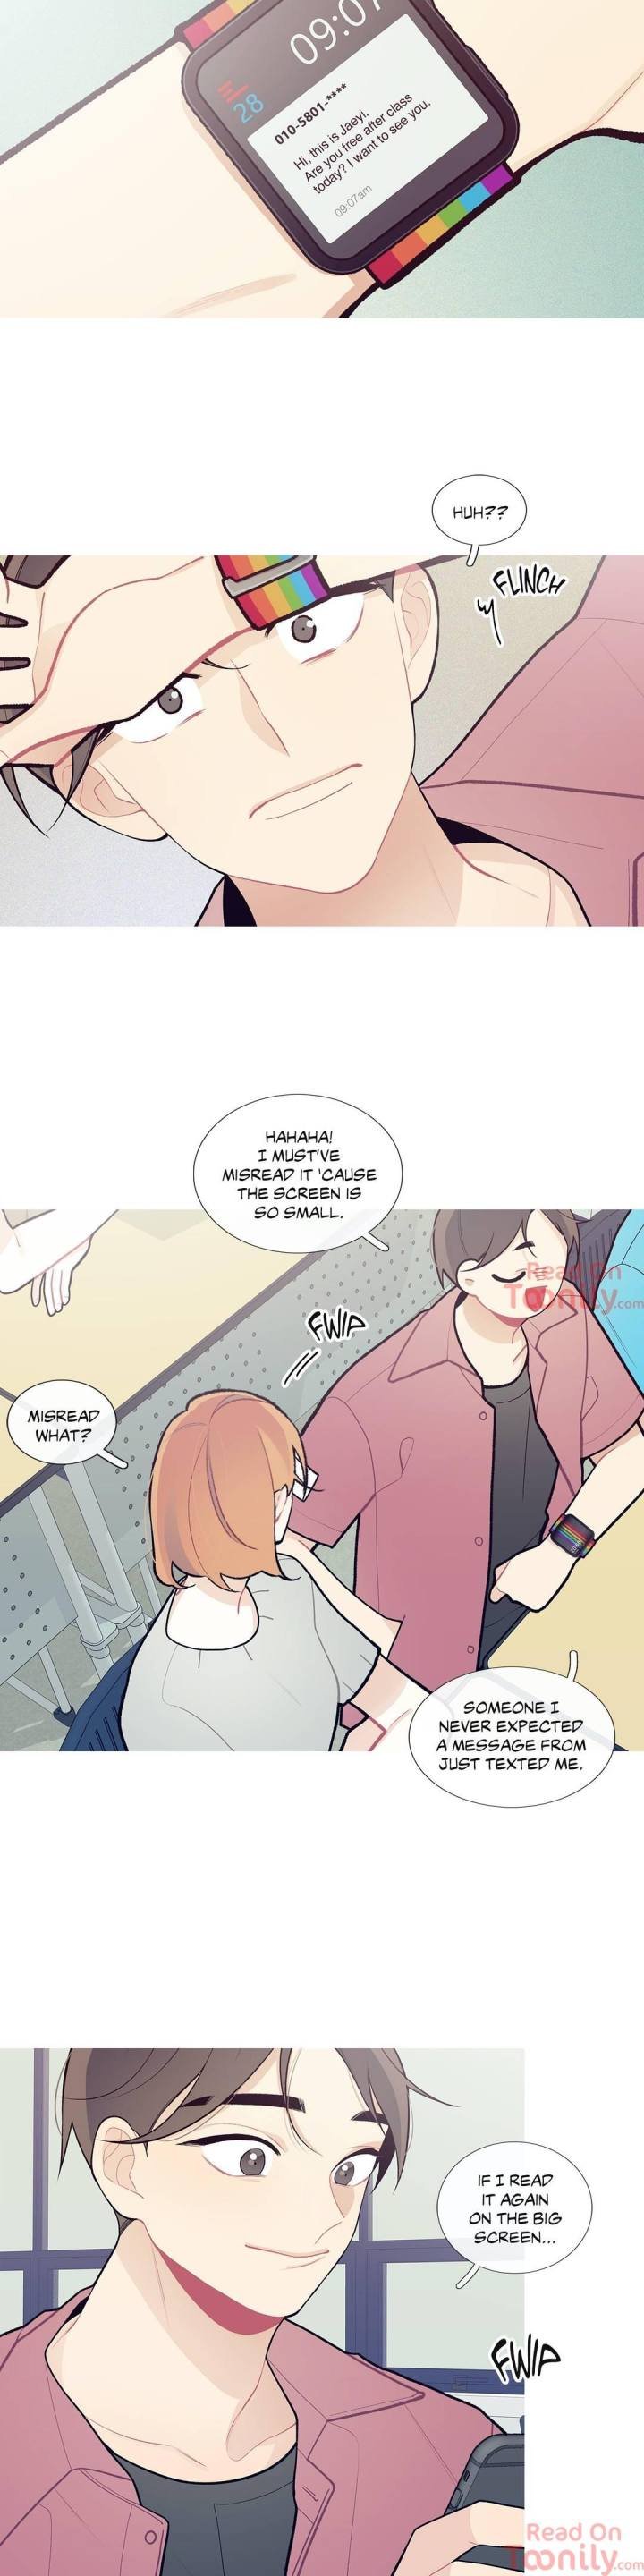 whats-going-on-chap-31-16